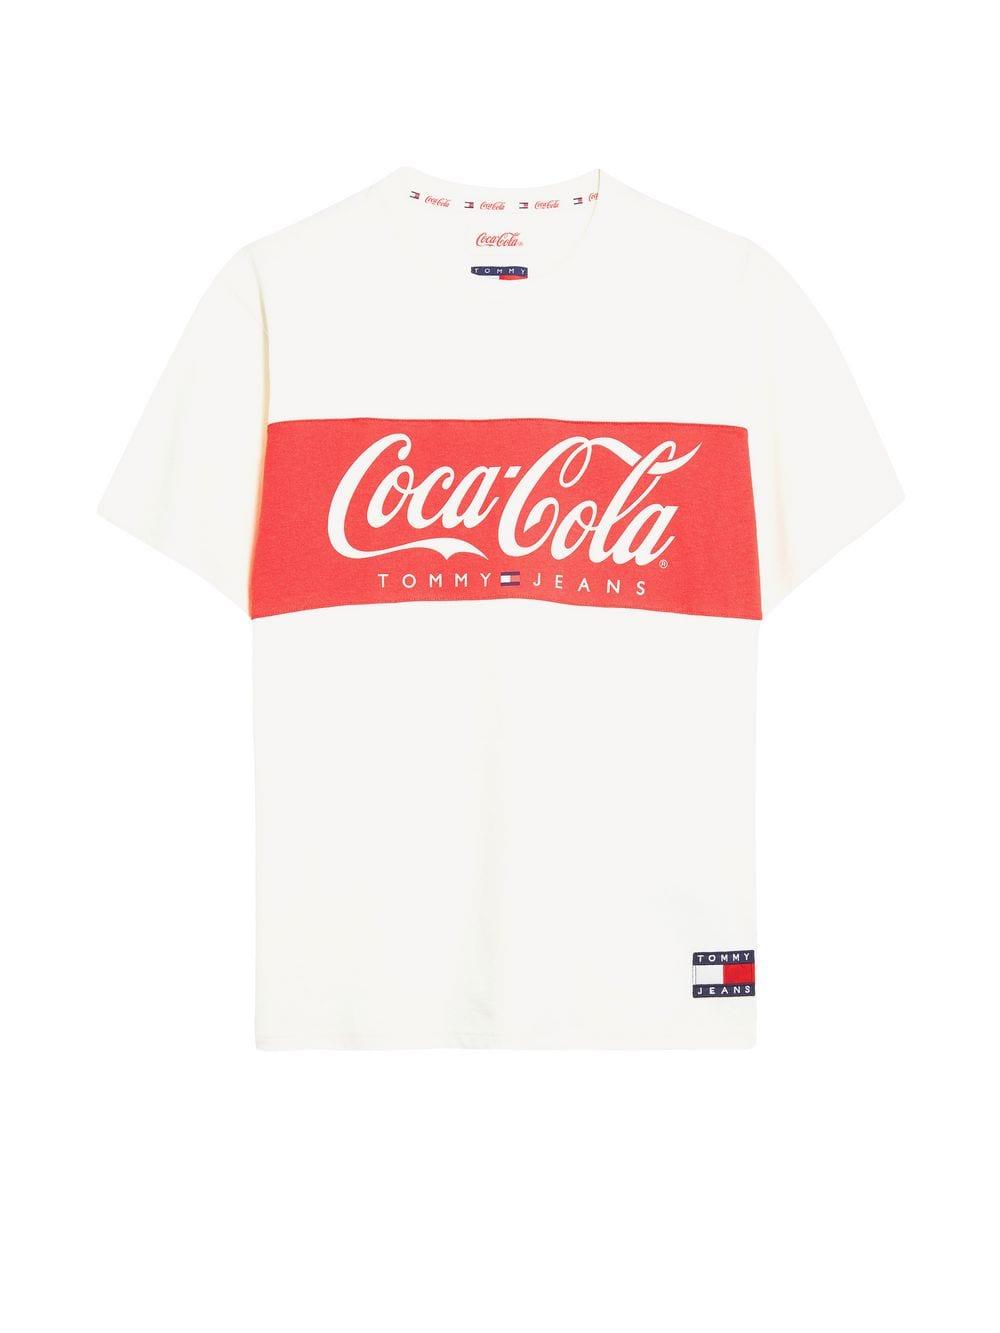 Tommy Hilfiger Cola Cheap Sale - anuariocidob.org 1686980842